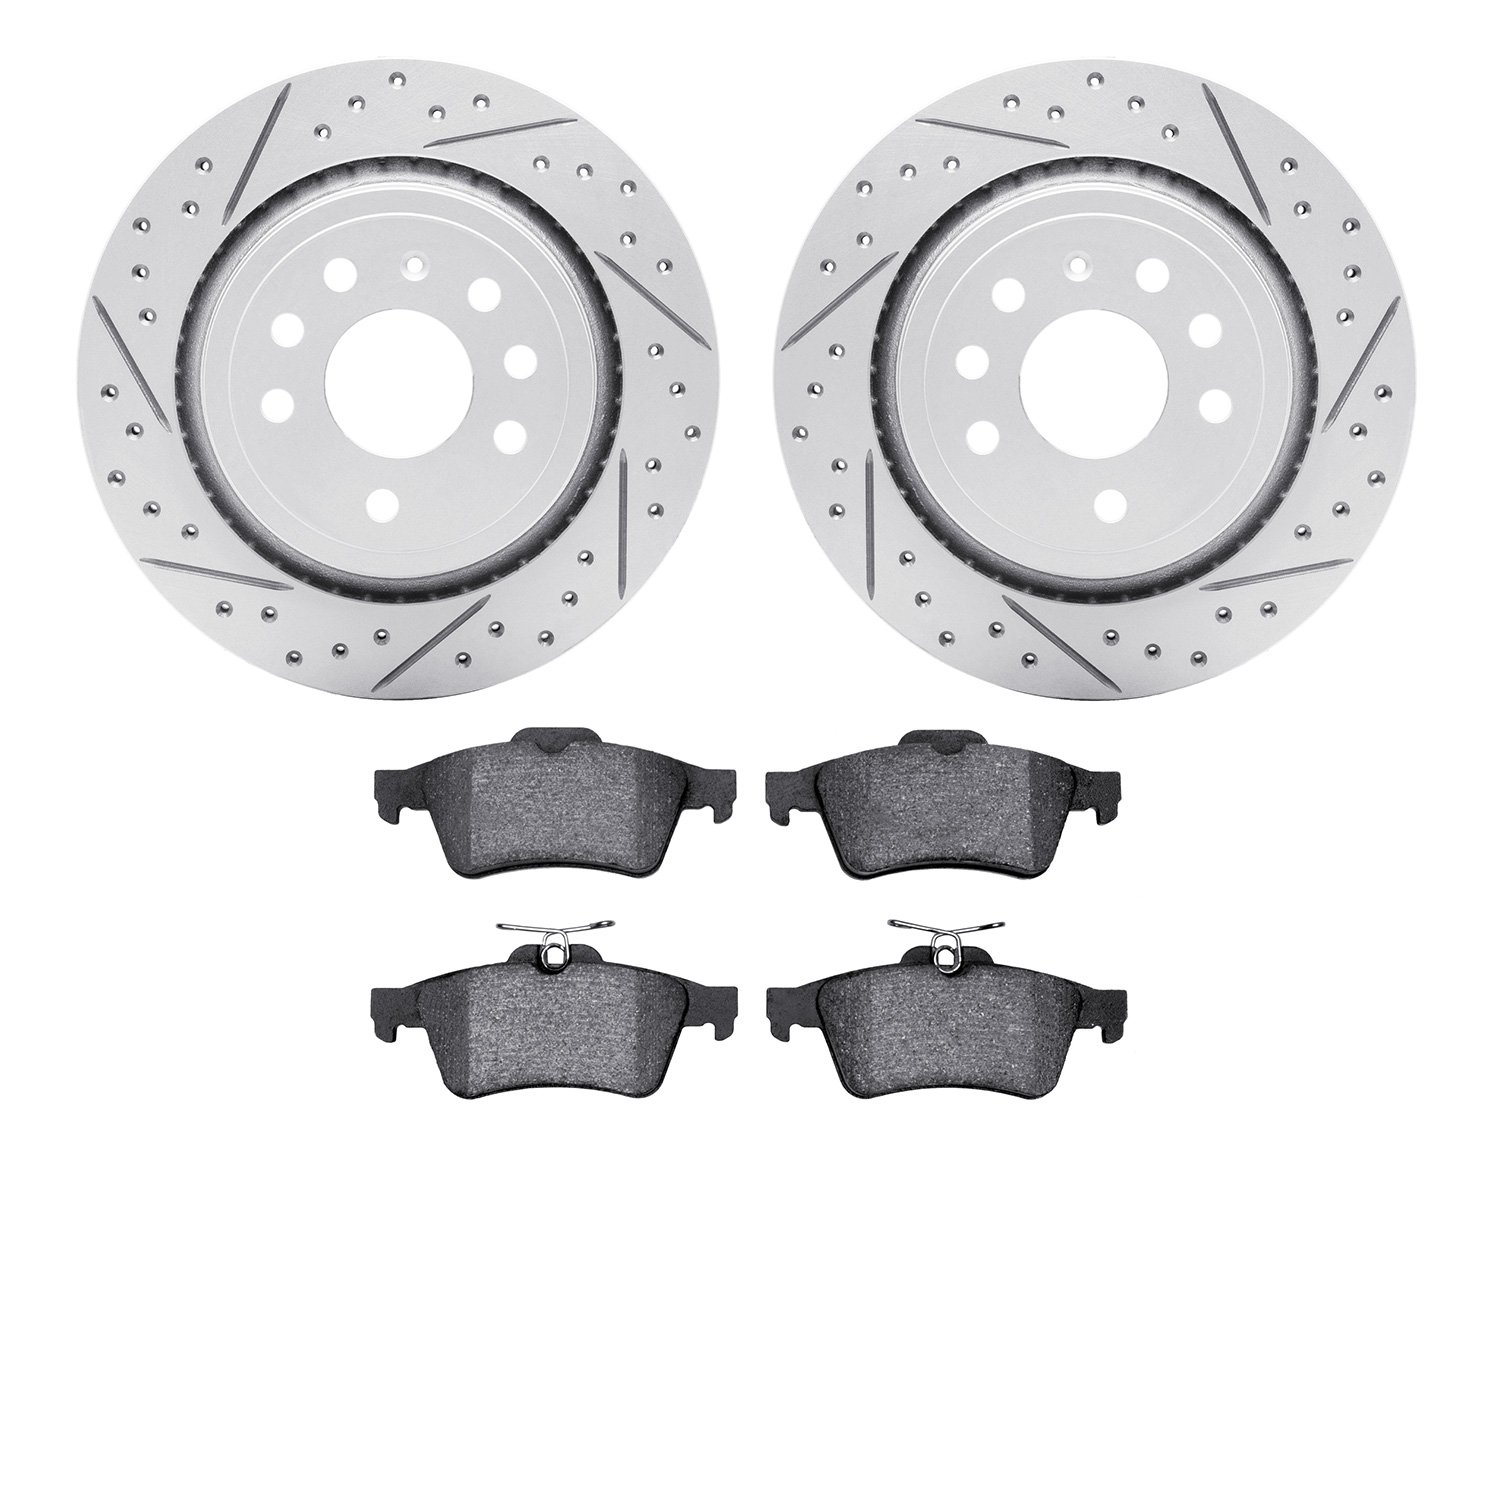 2502-65014 Geoperformance Drilled/Slotted Rotors w/5000 Advanced Brake Pads Kit, 2003-2003 GM, Position: Rear